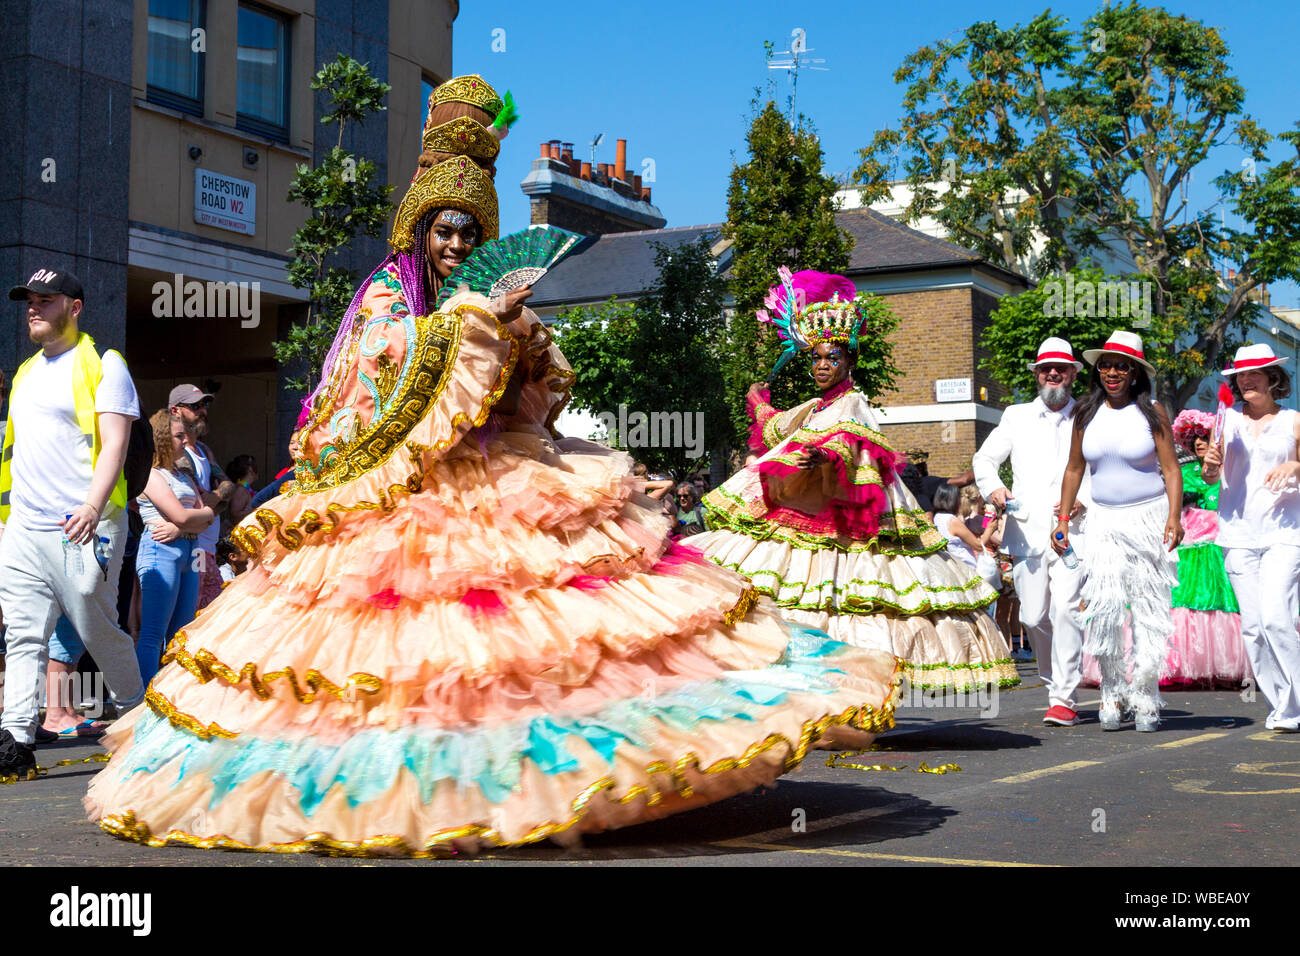 26 August 2019 - Woman in a long crinoline dress and ornate headdress at the Notting Hill Carnival on a hot Bank Holiday Monday, London, UK Stock Photo